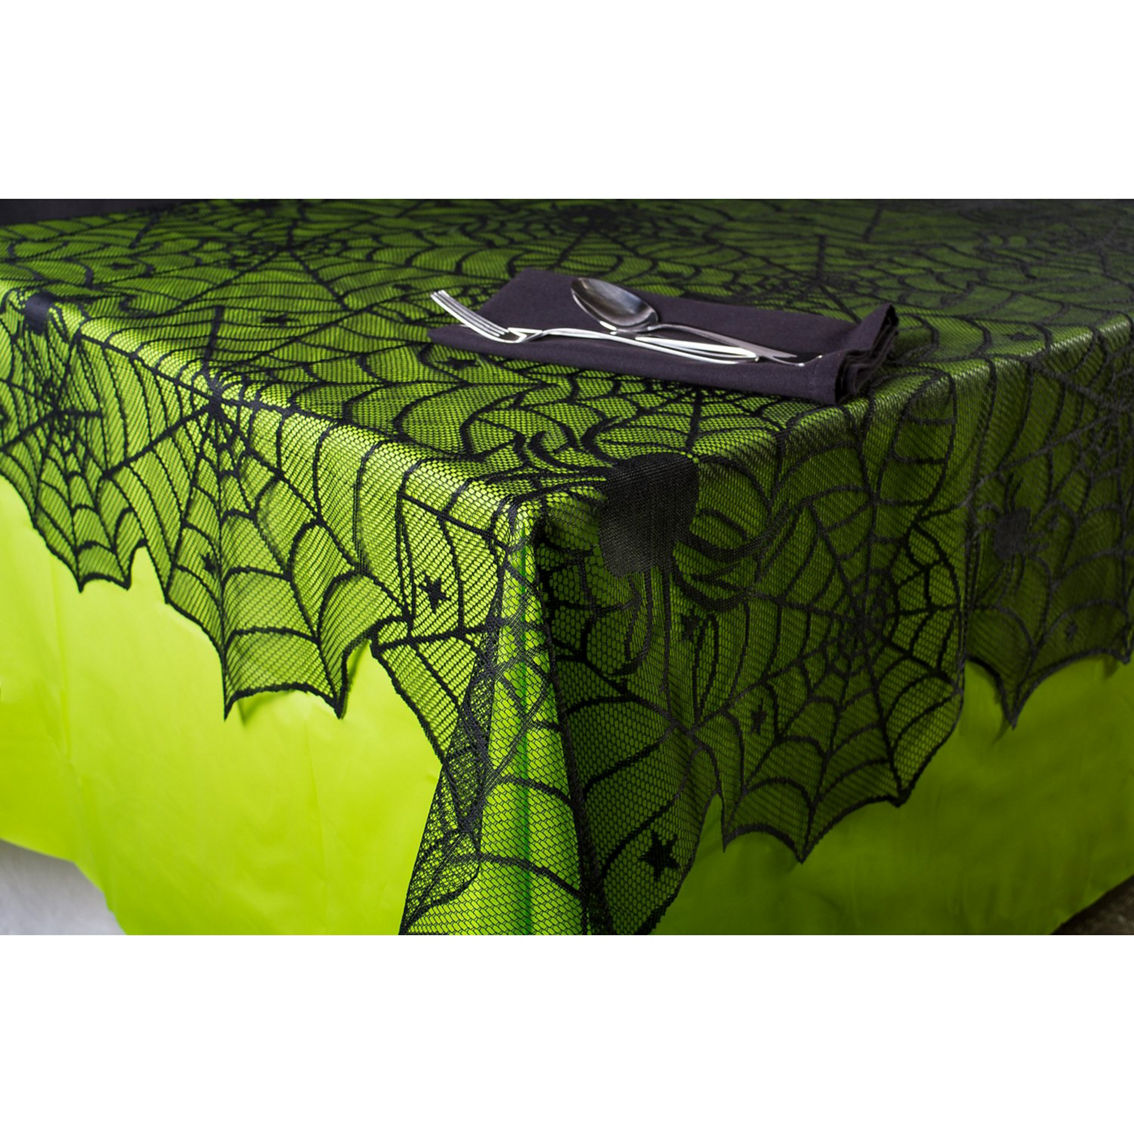 Design Imports 54 in. x 72 in. Halloween Lace Tablecloth - Image 8 of 9